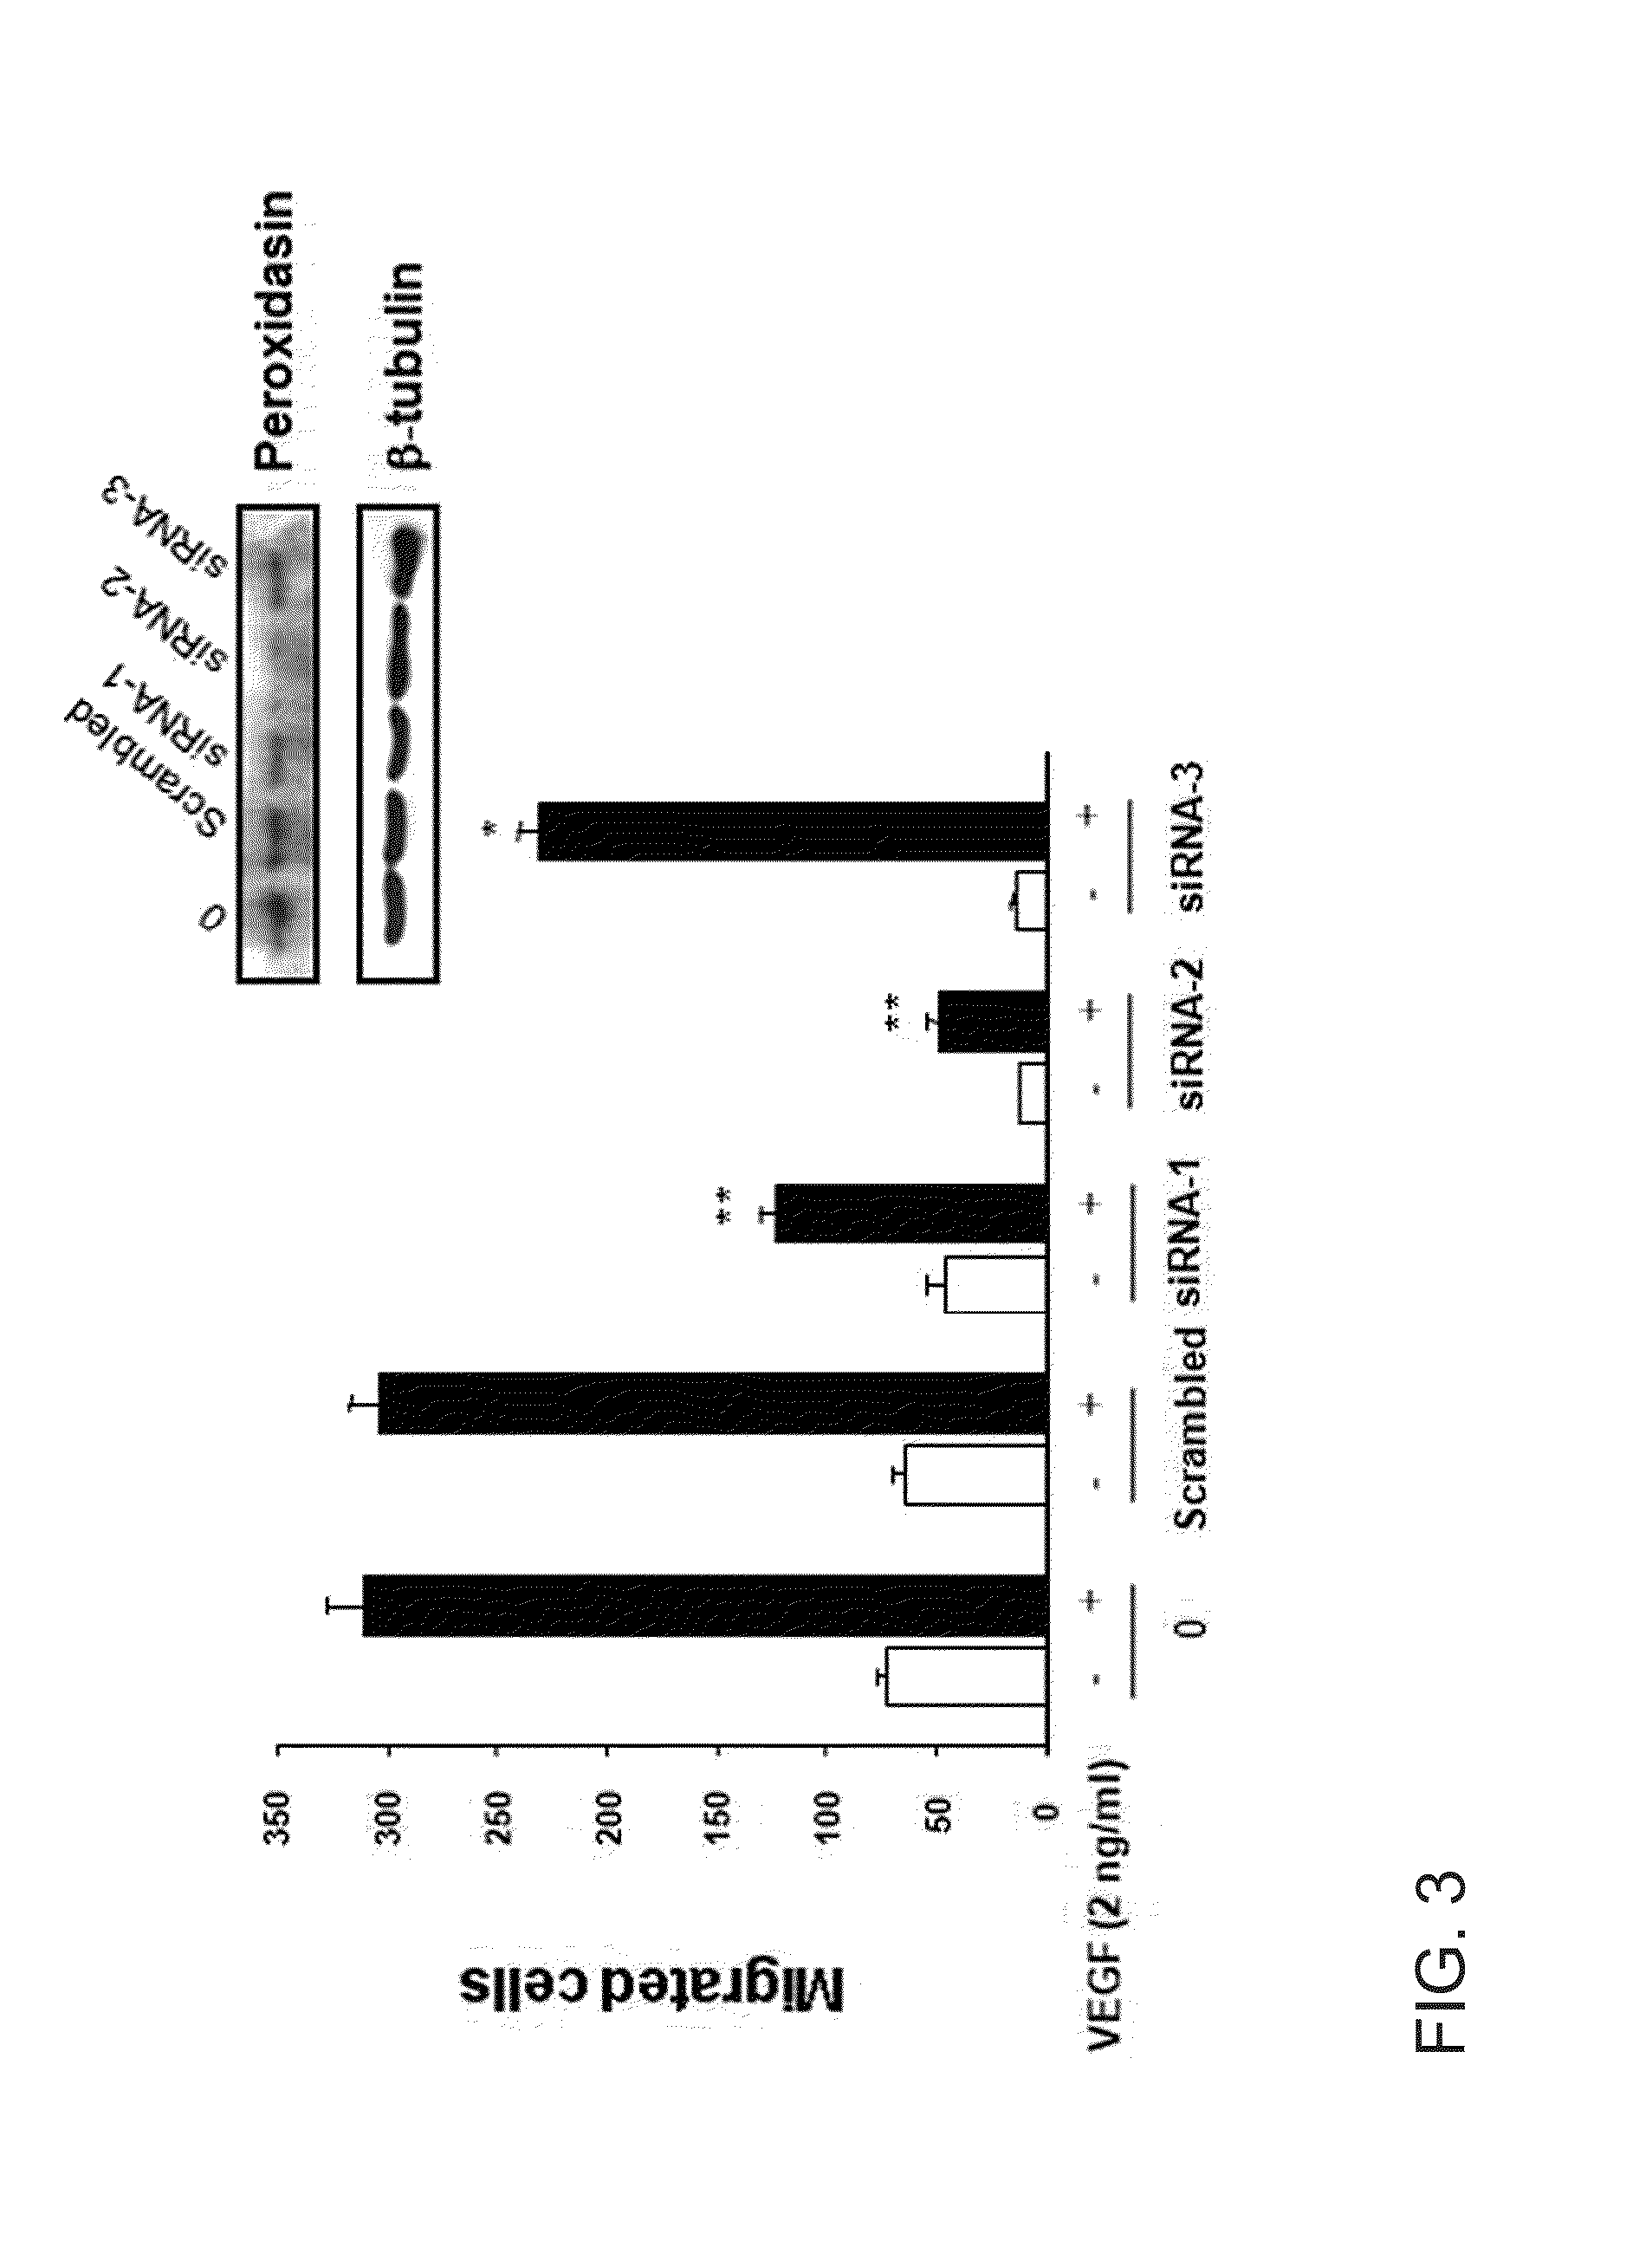 Composition for inhibiting angiogenesis containing a peroxidasin inhibitor as an active ingredient